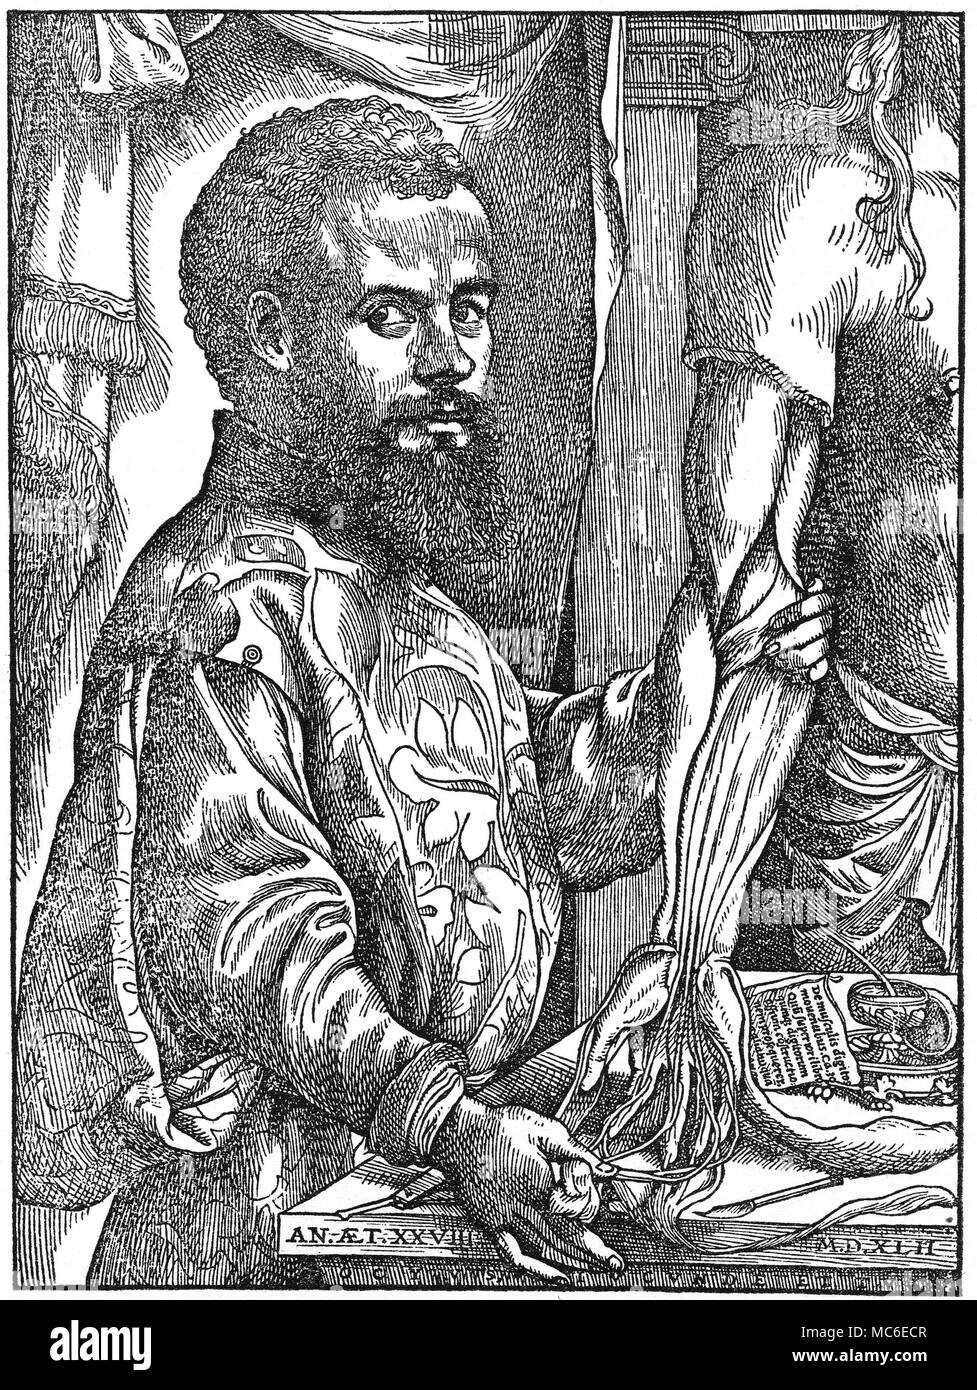 MEDICAL - VESALIUS Portrait of the great anatomist and doctor, Andreas Vesalius (1493-1541), in 1542. From Vesalius, De Humani Corpori Fabrica, 1542. The first human dissection Vesalius did is said to have been on the cadavre of a criminal, who had been hanged on the gallows at Louvain. Stock Photo